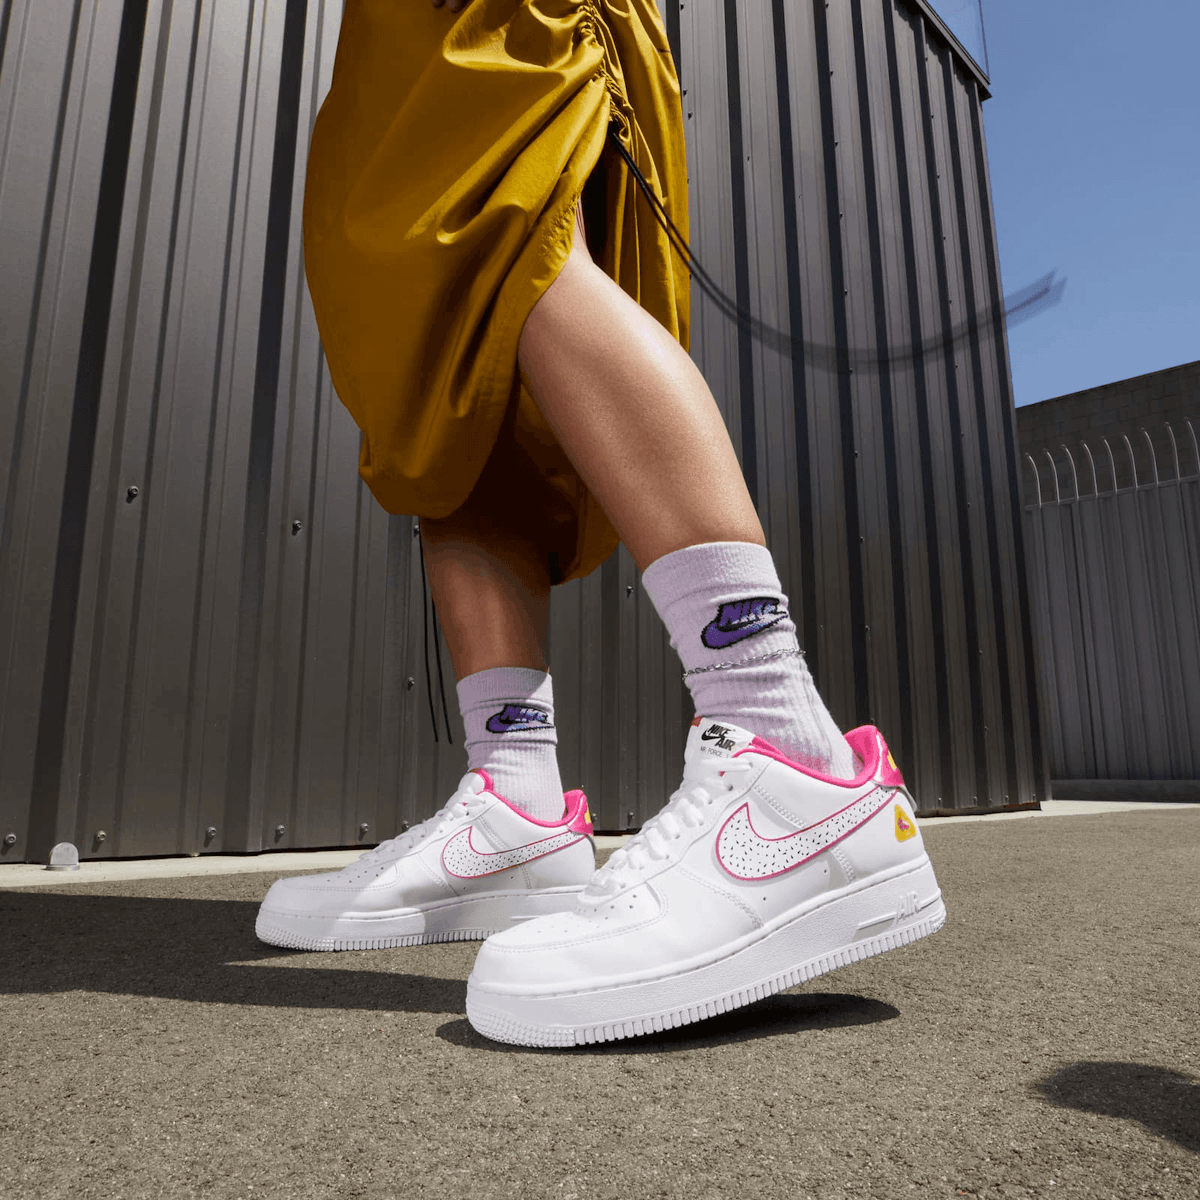 Nike Air Force 1 Low '07 LX Dragon Fruit (W) - DV3809-100 Raffles and  Release Date